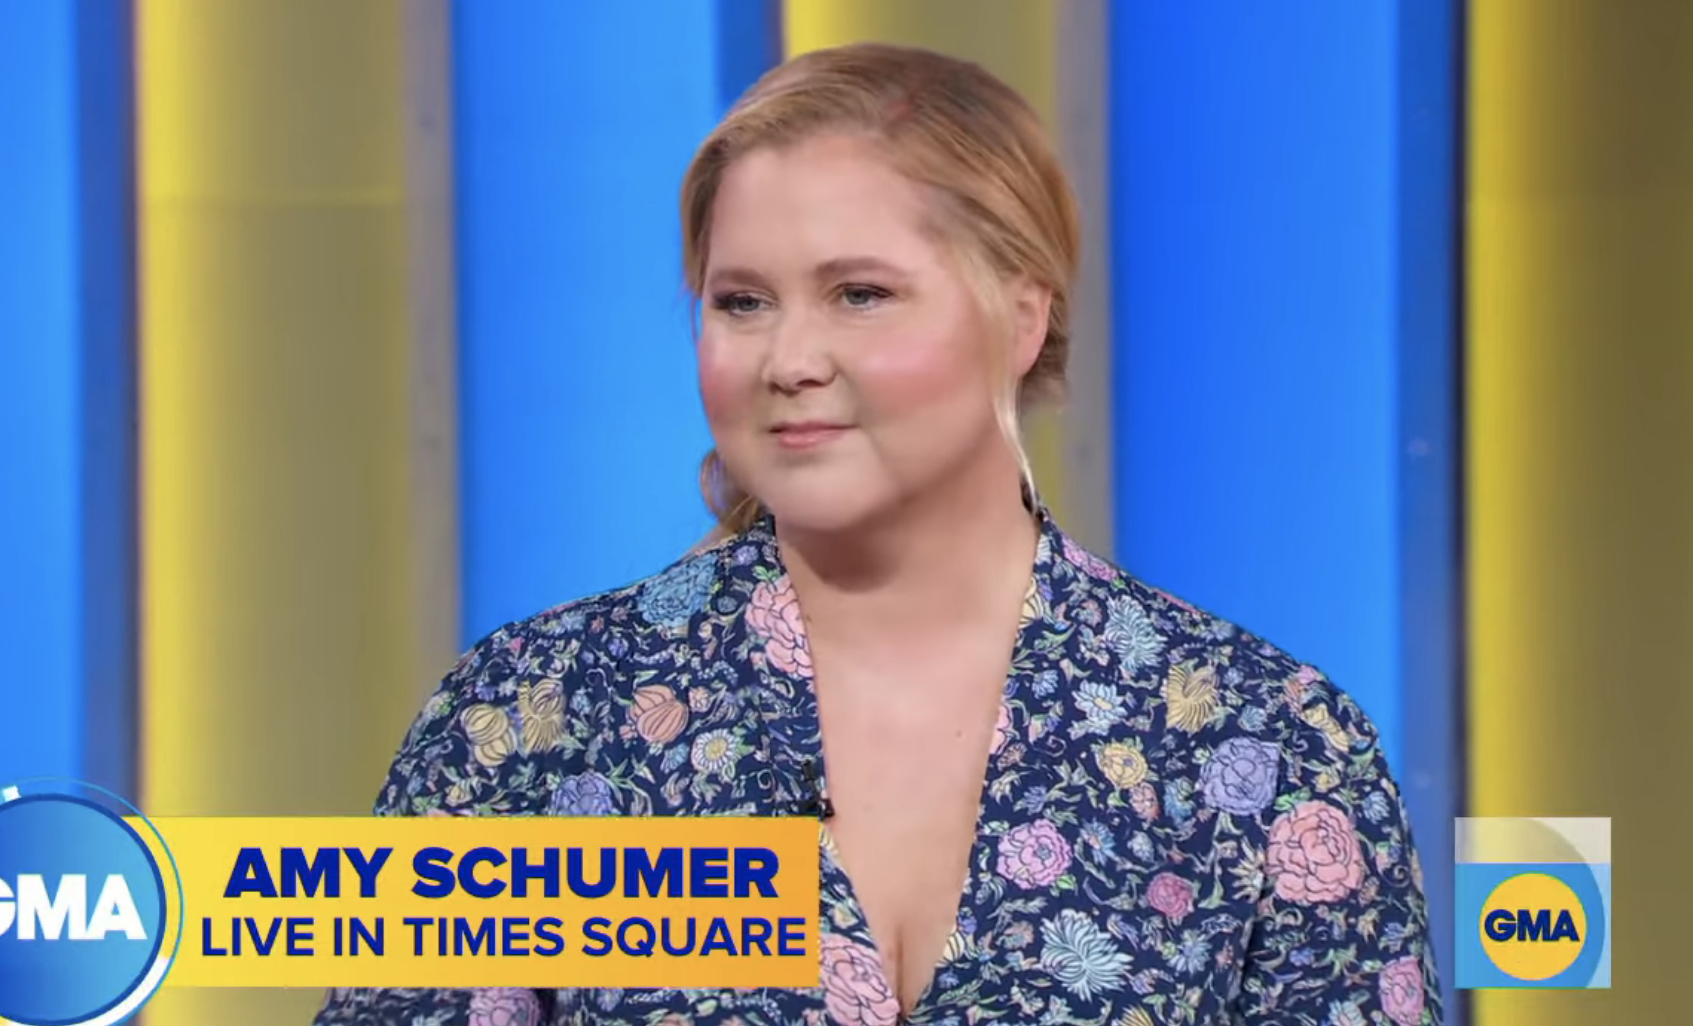 Amy wearing a floral top during a Good Morning America interview